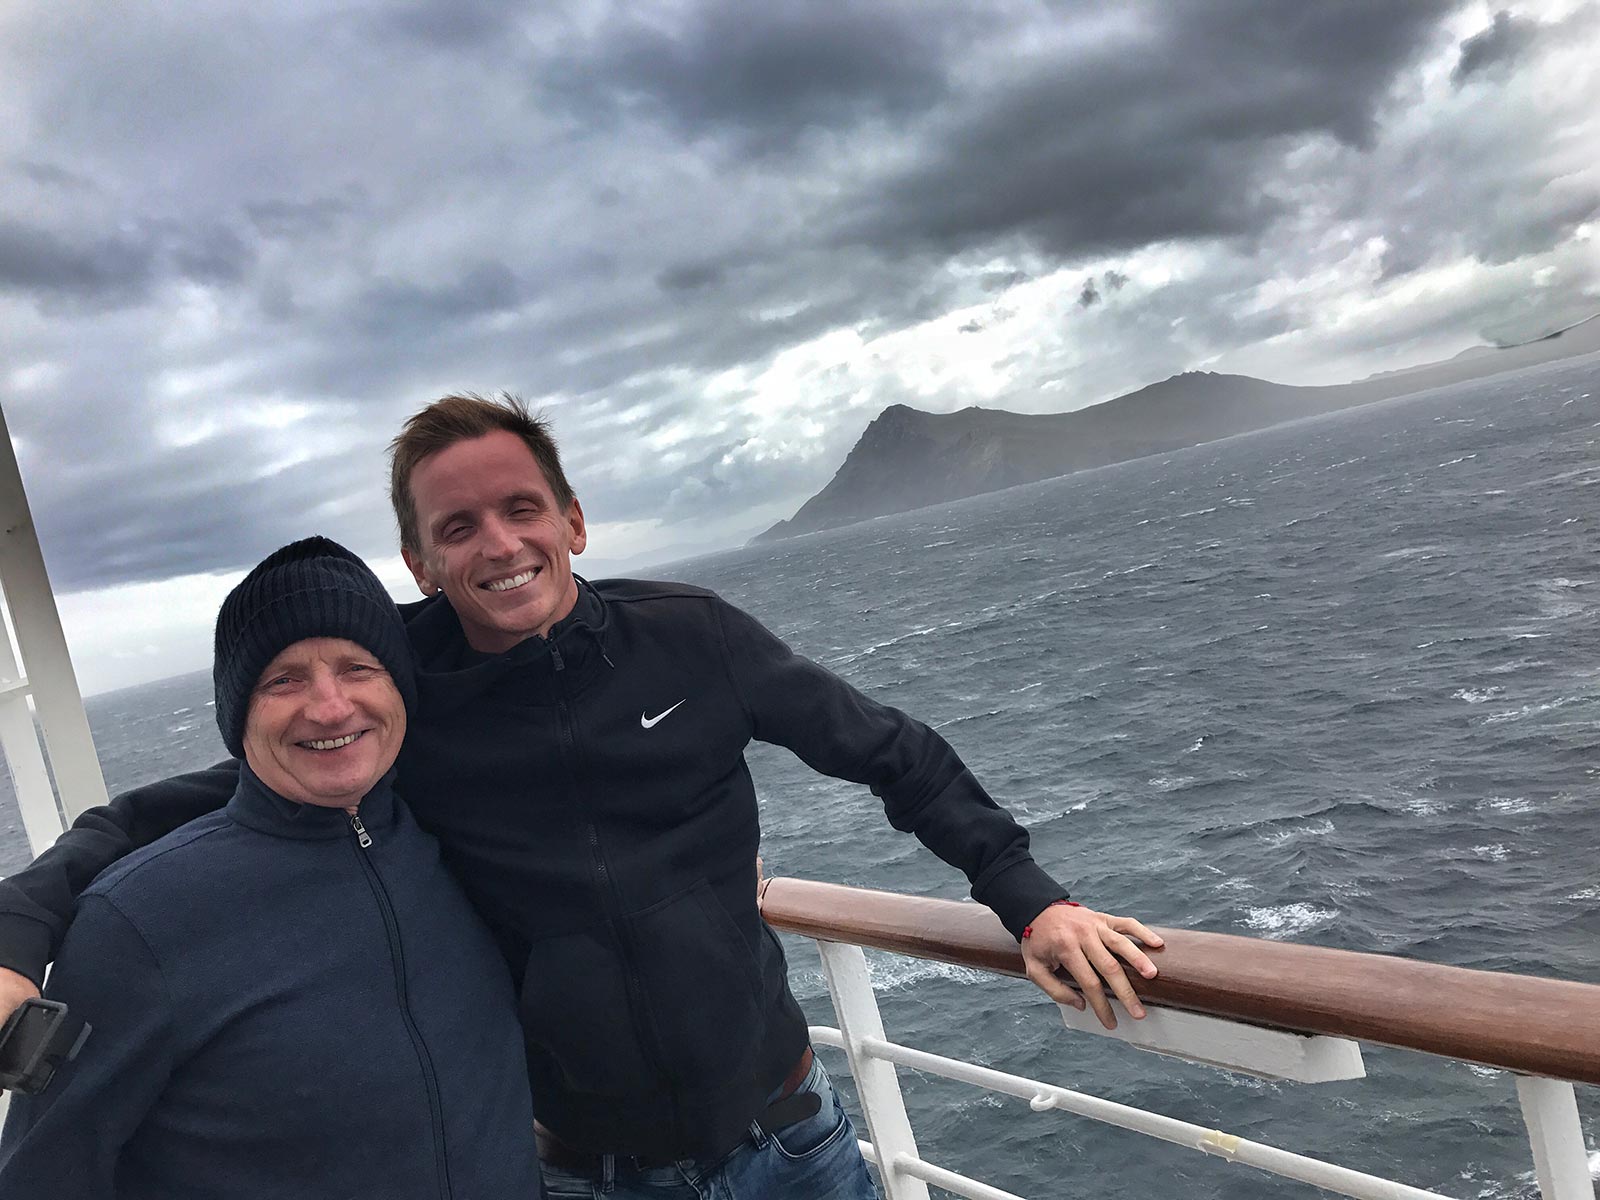 David Simpson and dad viewing Cape Horn, Chile. Cape Horn on the Cruise to the end of the world